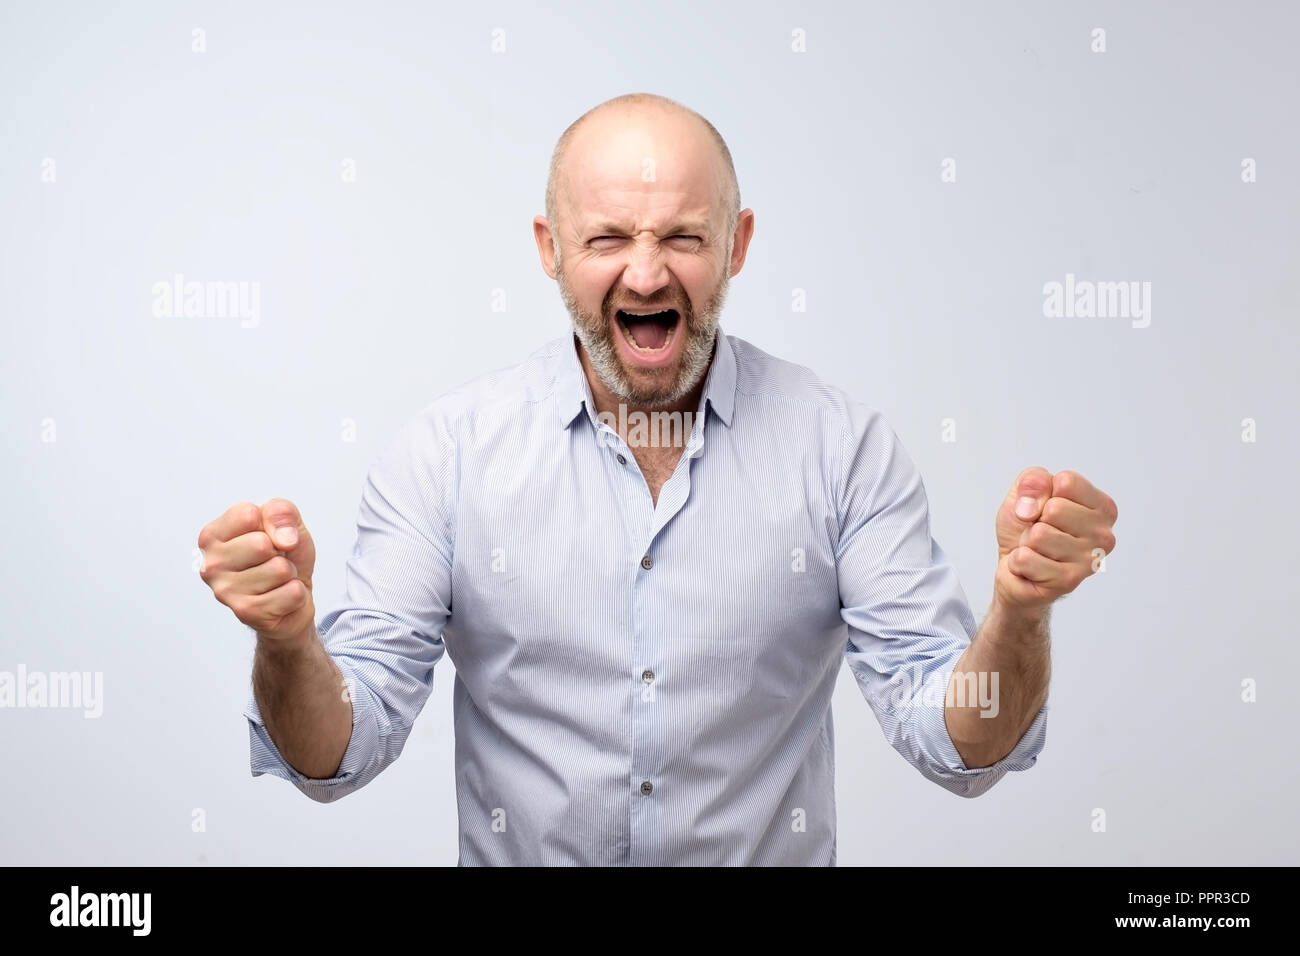 Emotions of a television fan. Shouting emotional angry man screaming holding fists up. Emotional, mature face. Stock Photo